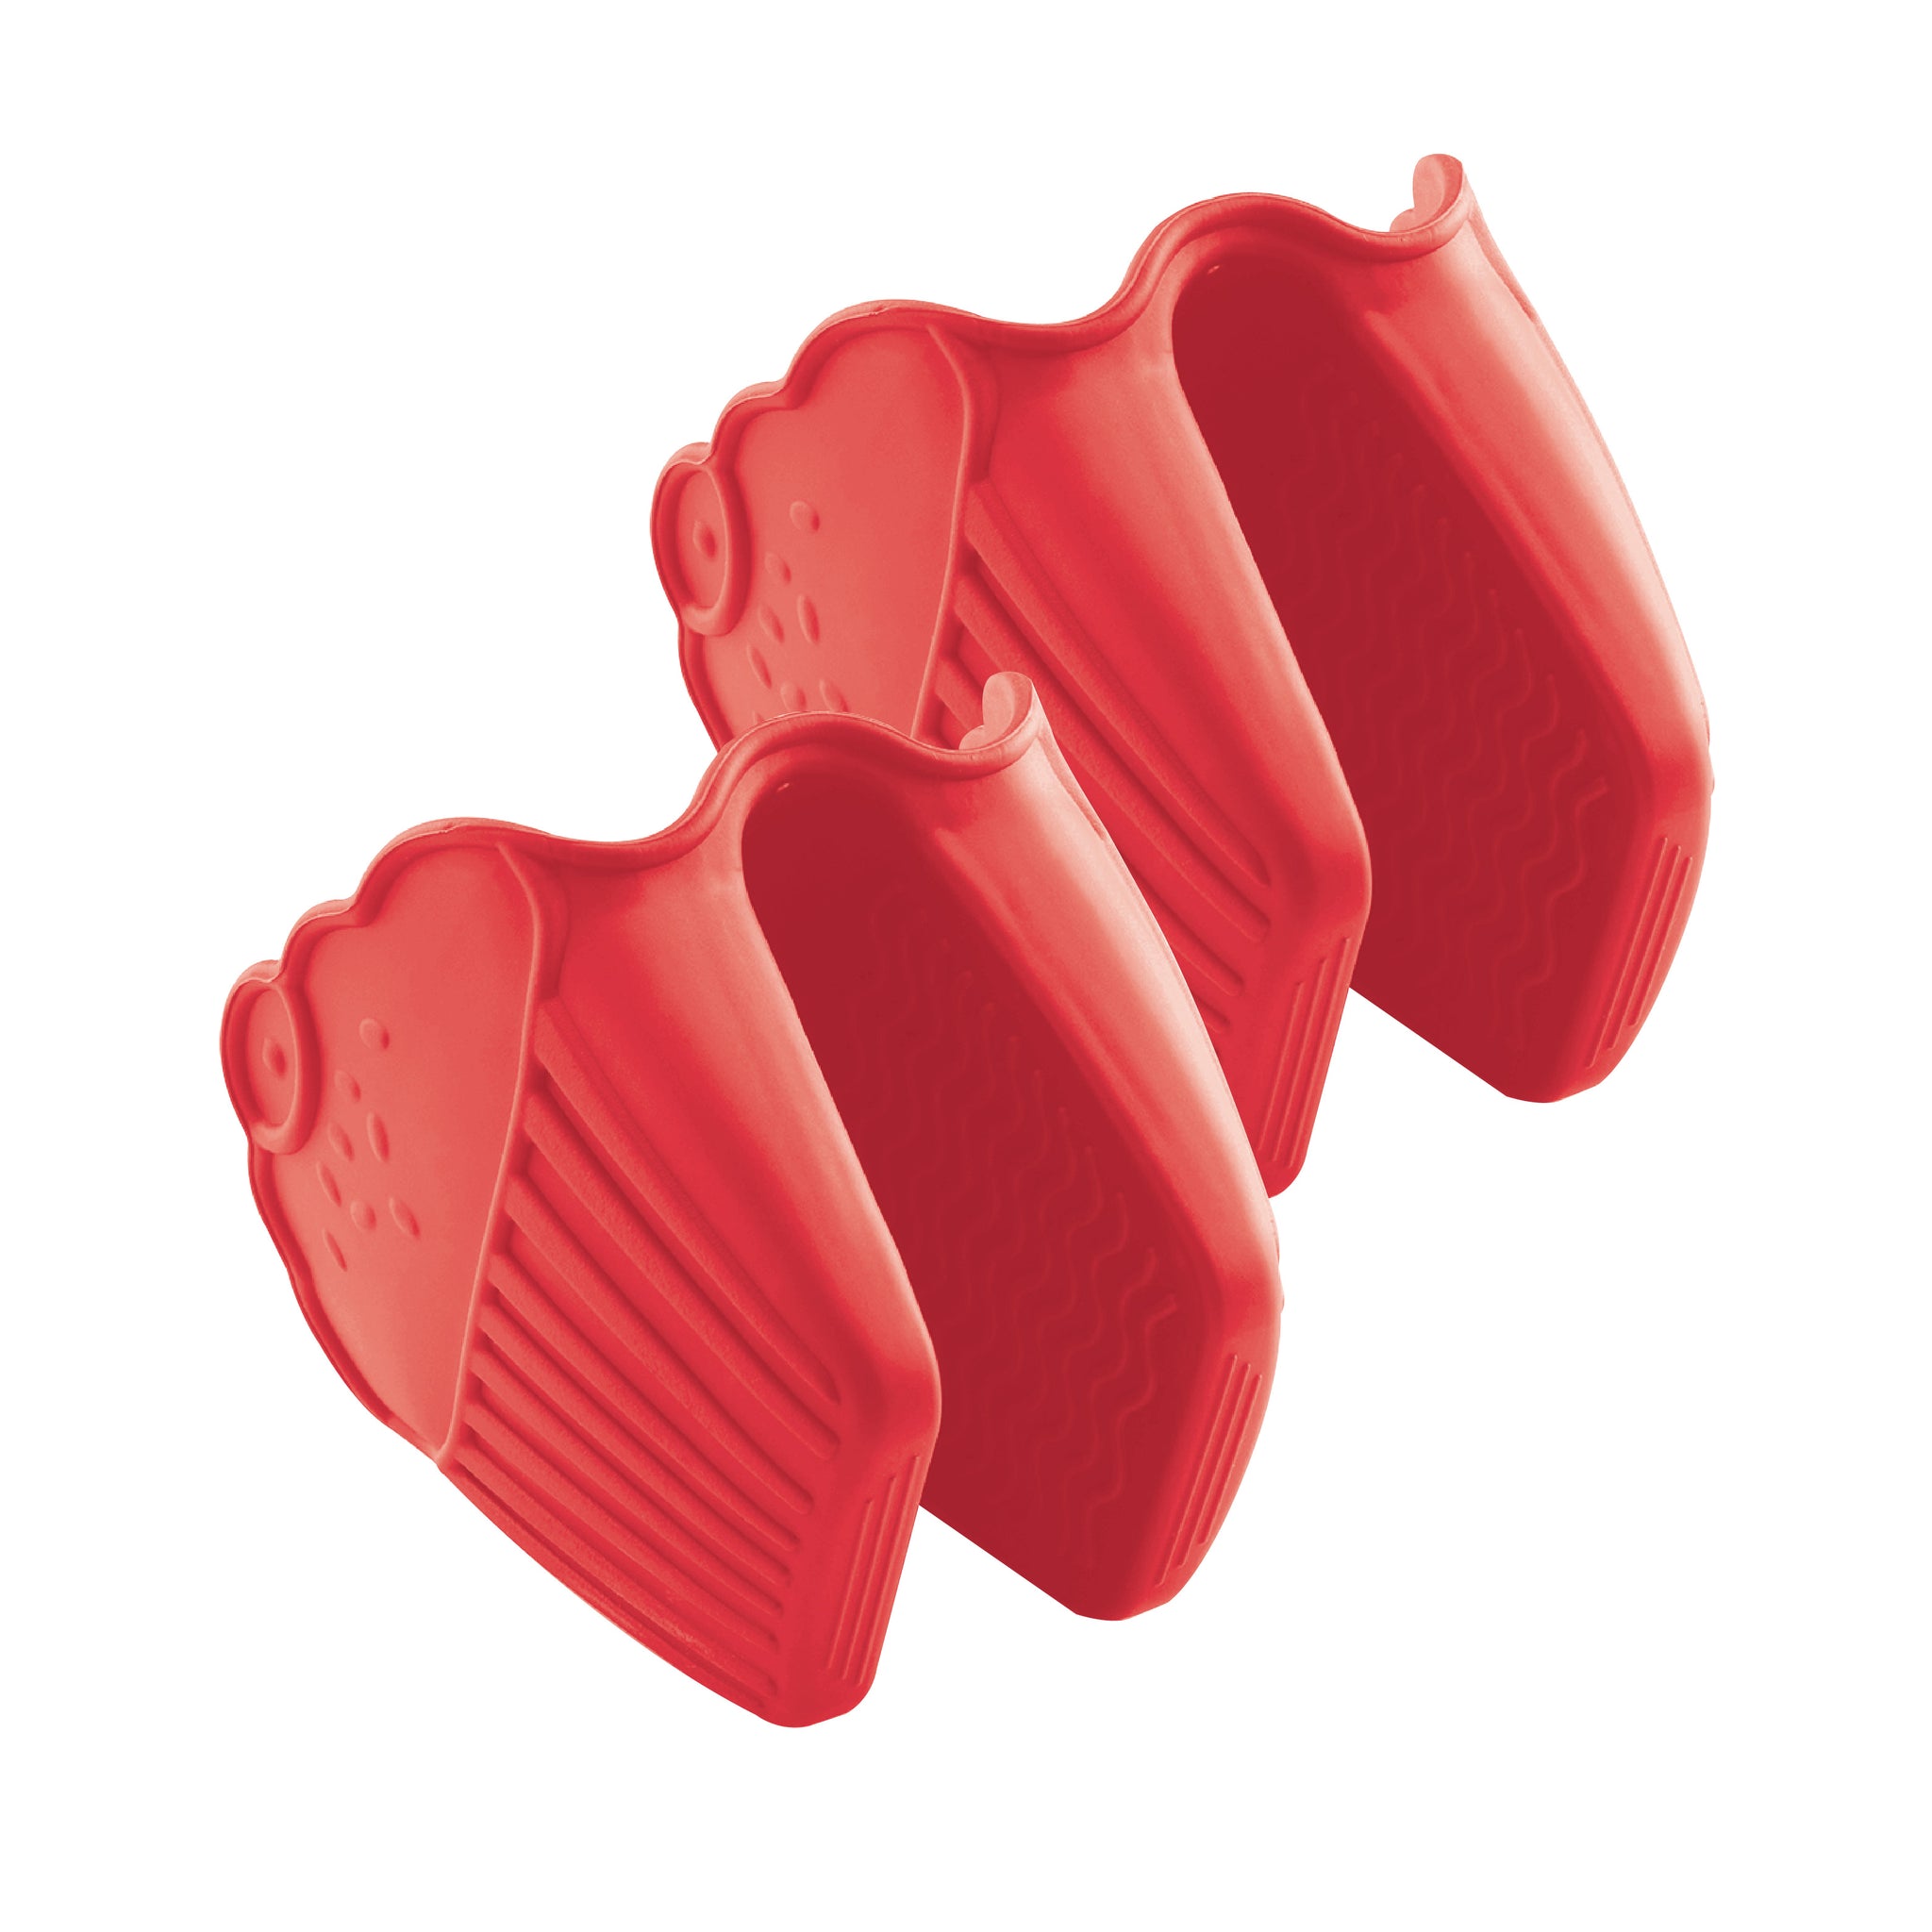 Cupcake Silicone Oven Mitts Red Cookware Accessories - Baker's Secret